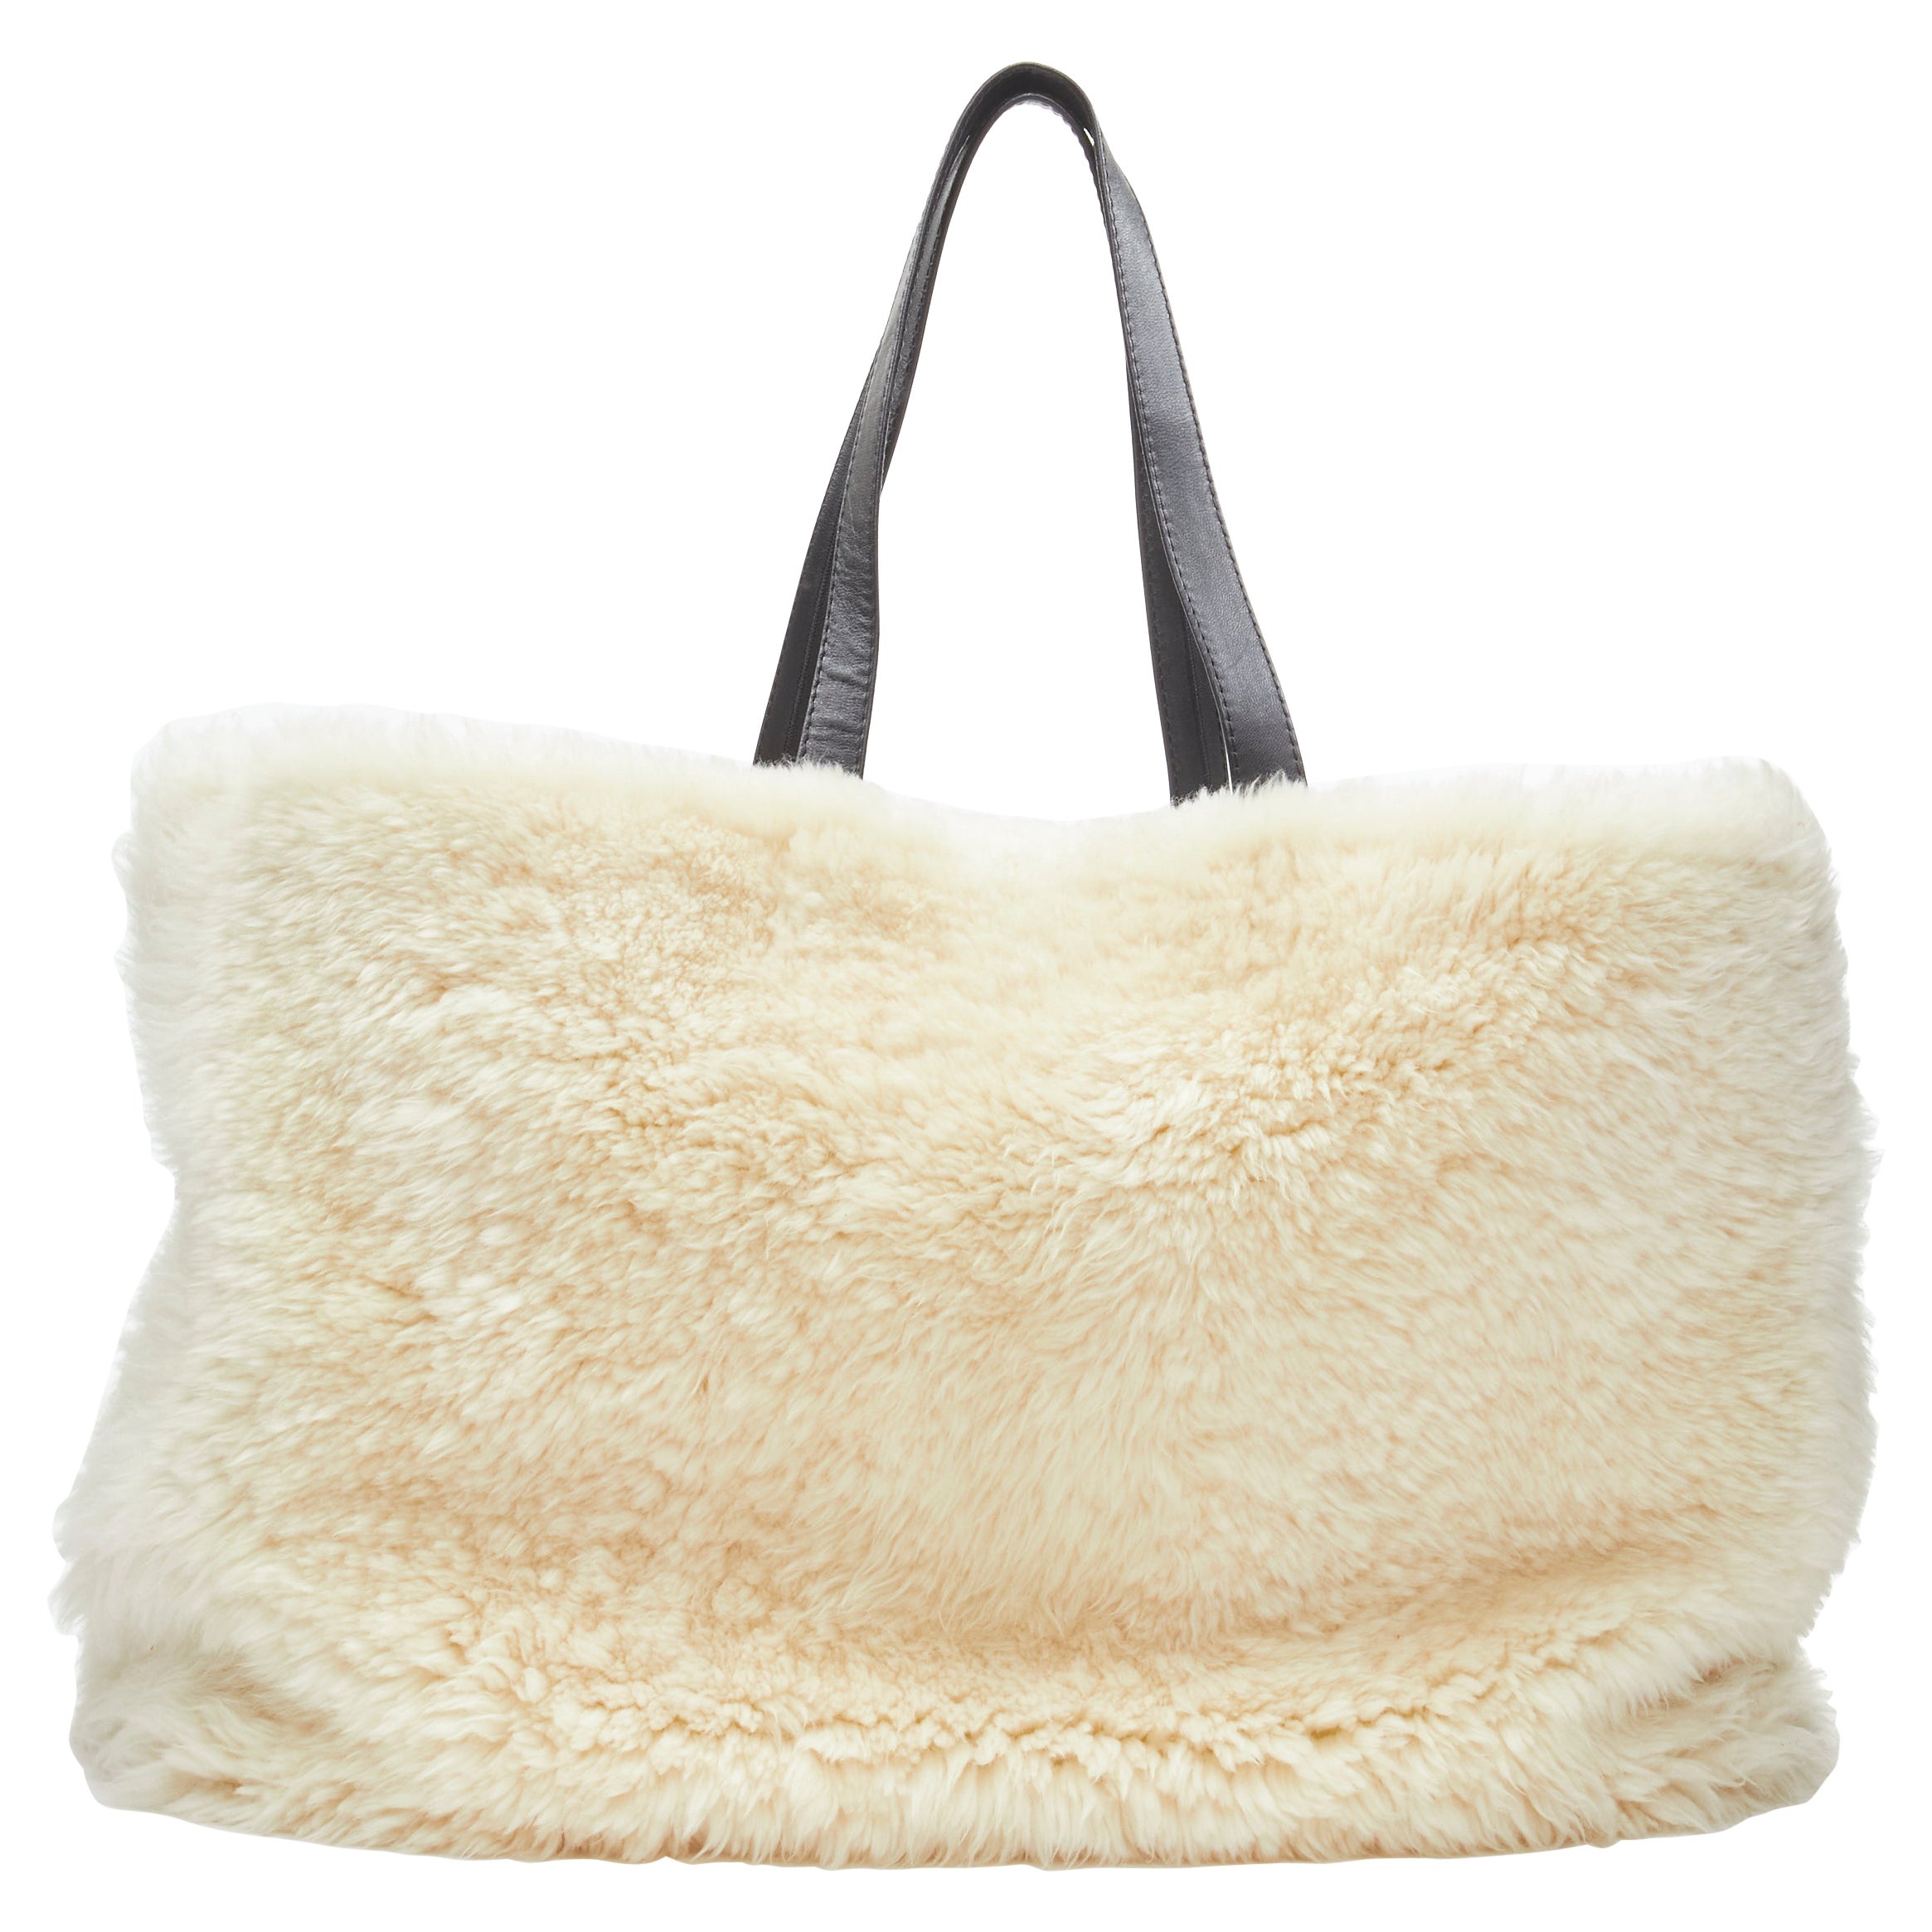 new PETER DO 2019 peach beige soft shearling fur oversized leather bag